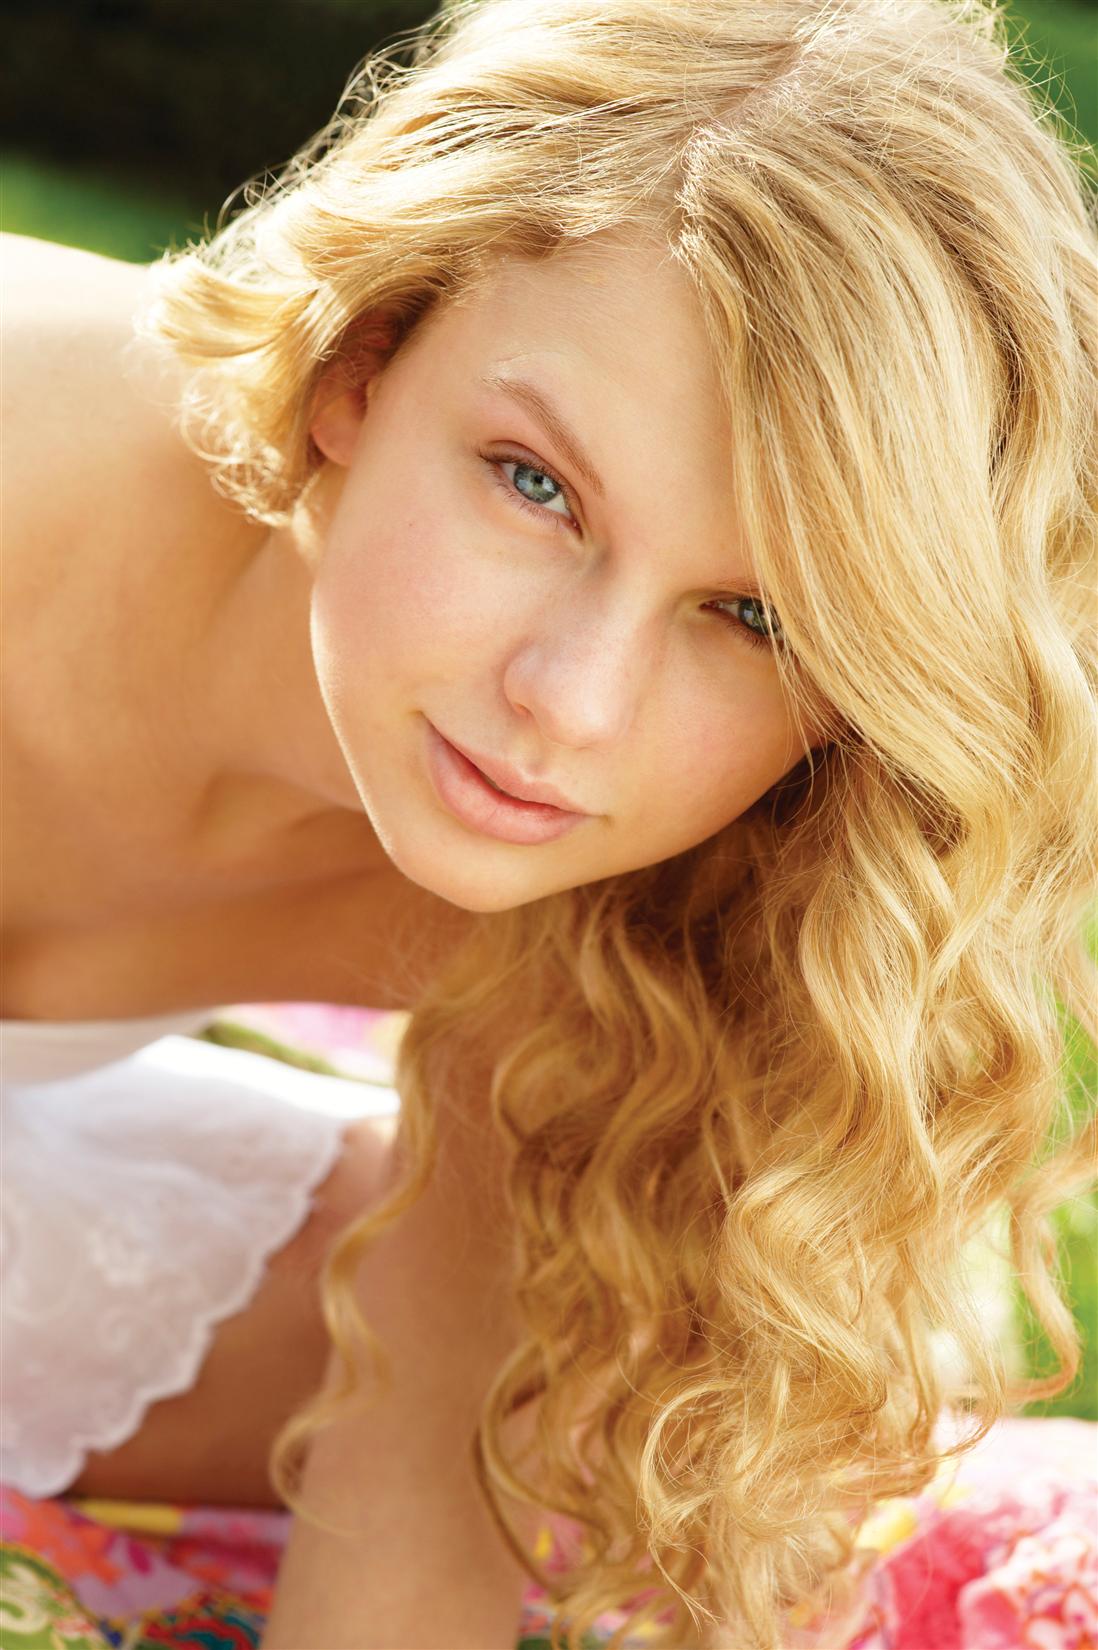 Taylor Swift not wearing any makeup